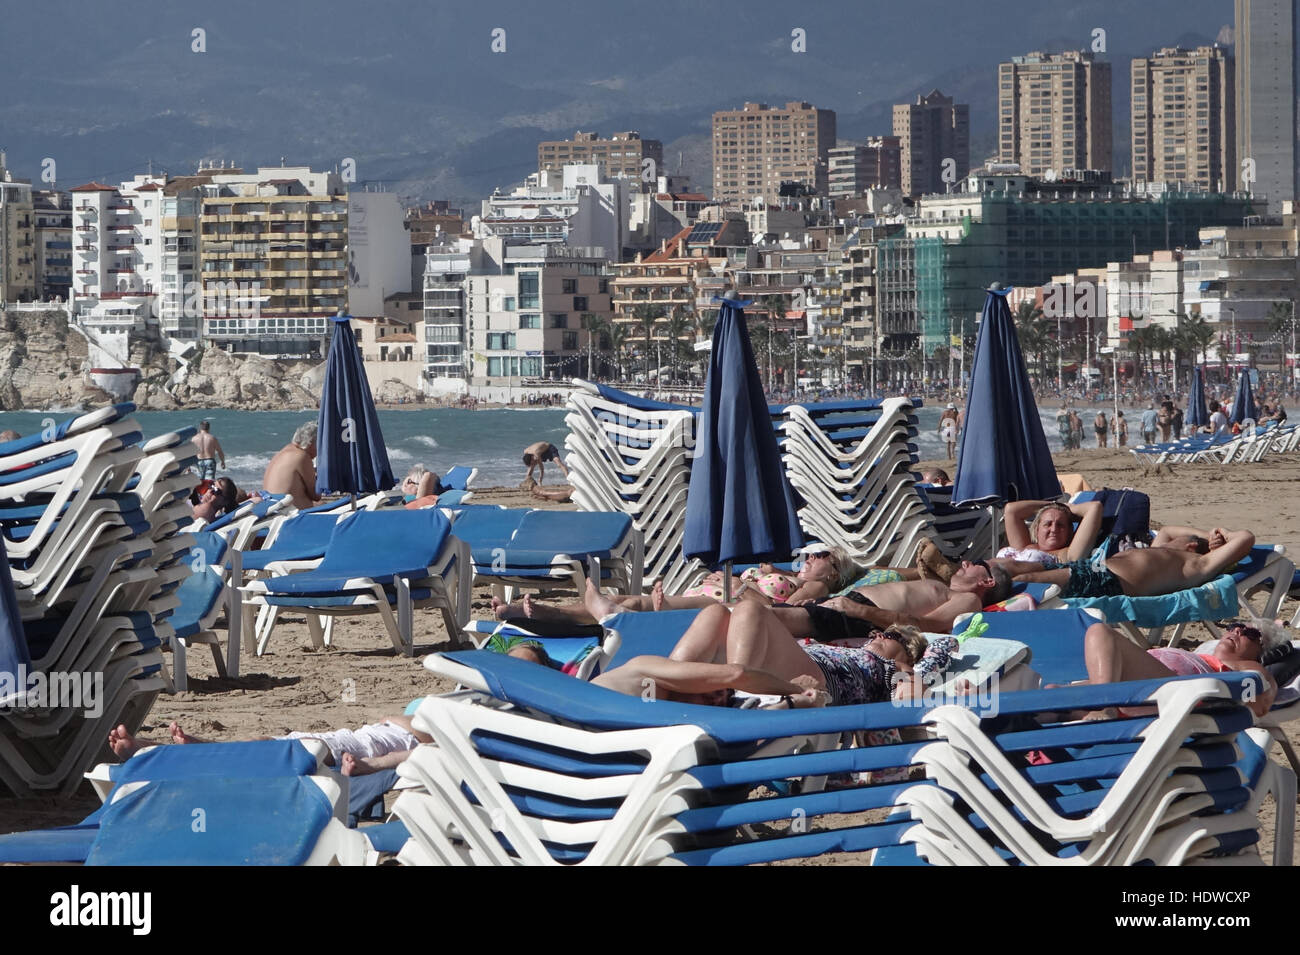 Crowded beach scene with sunbeds and people relaxing or exercising on the shoreline with skyscrapers in back Stock Photo